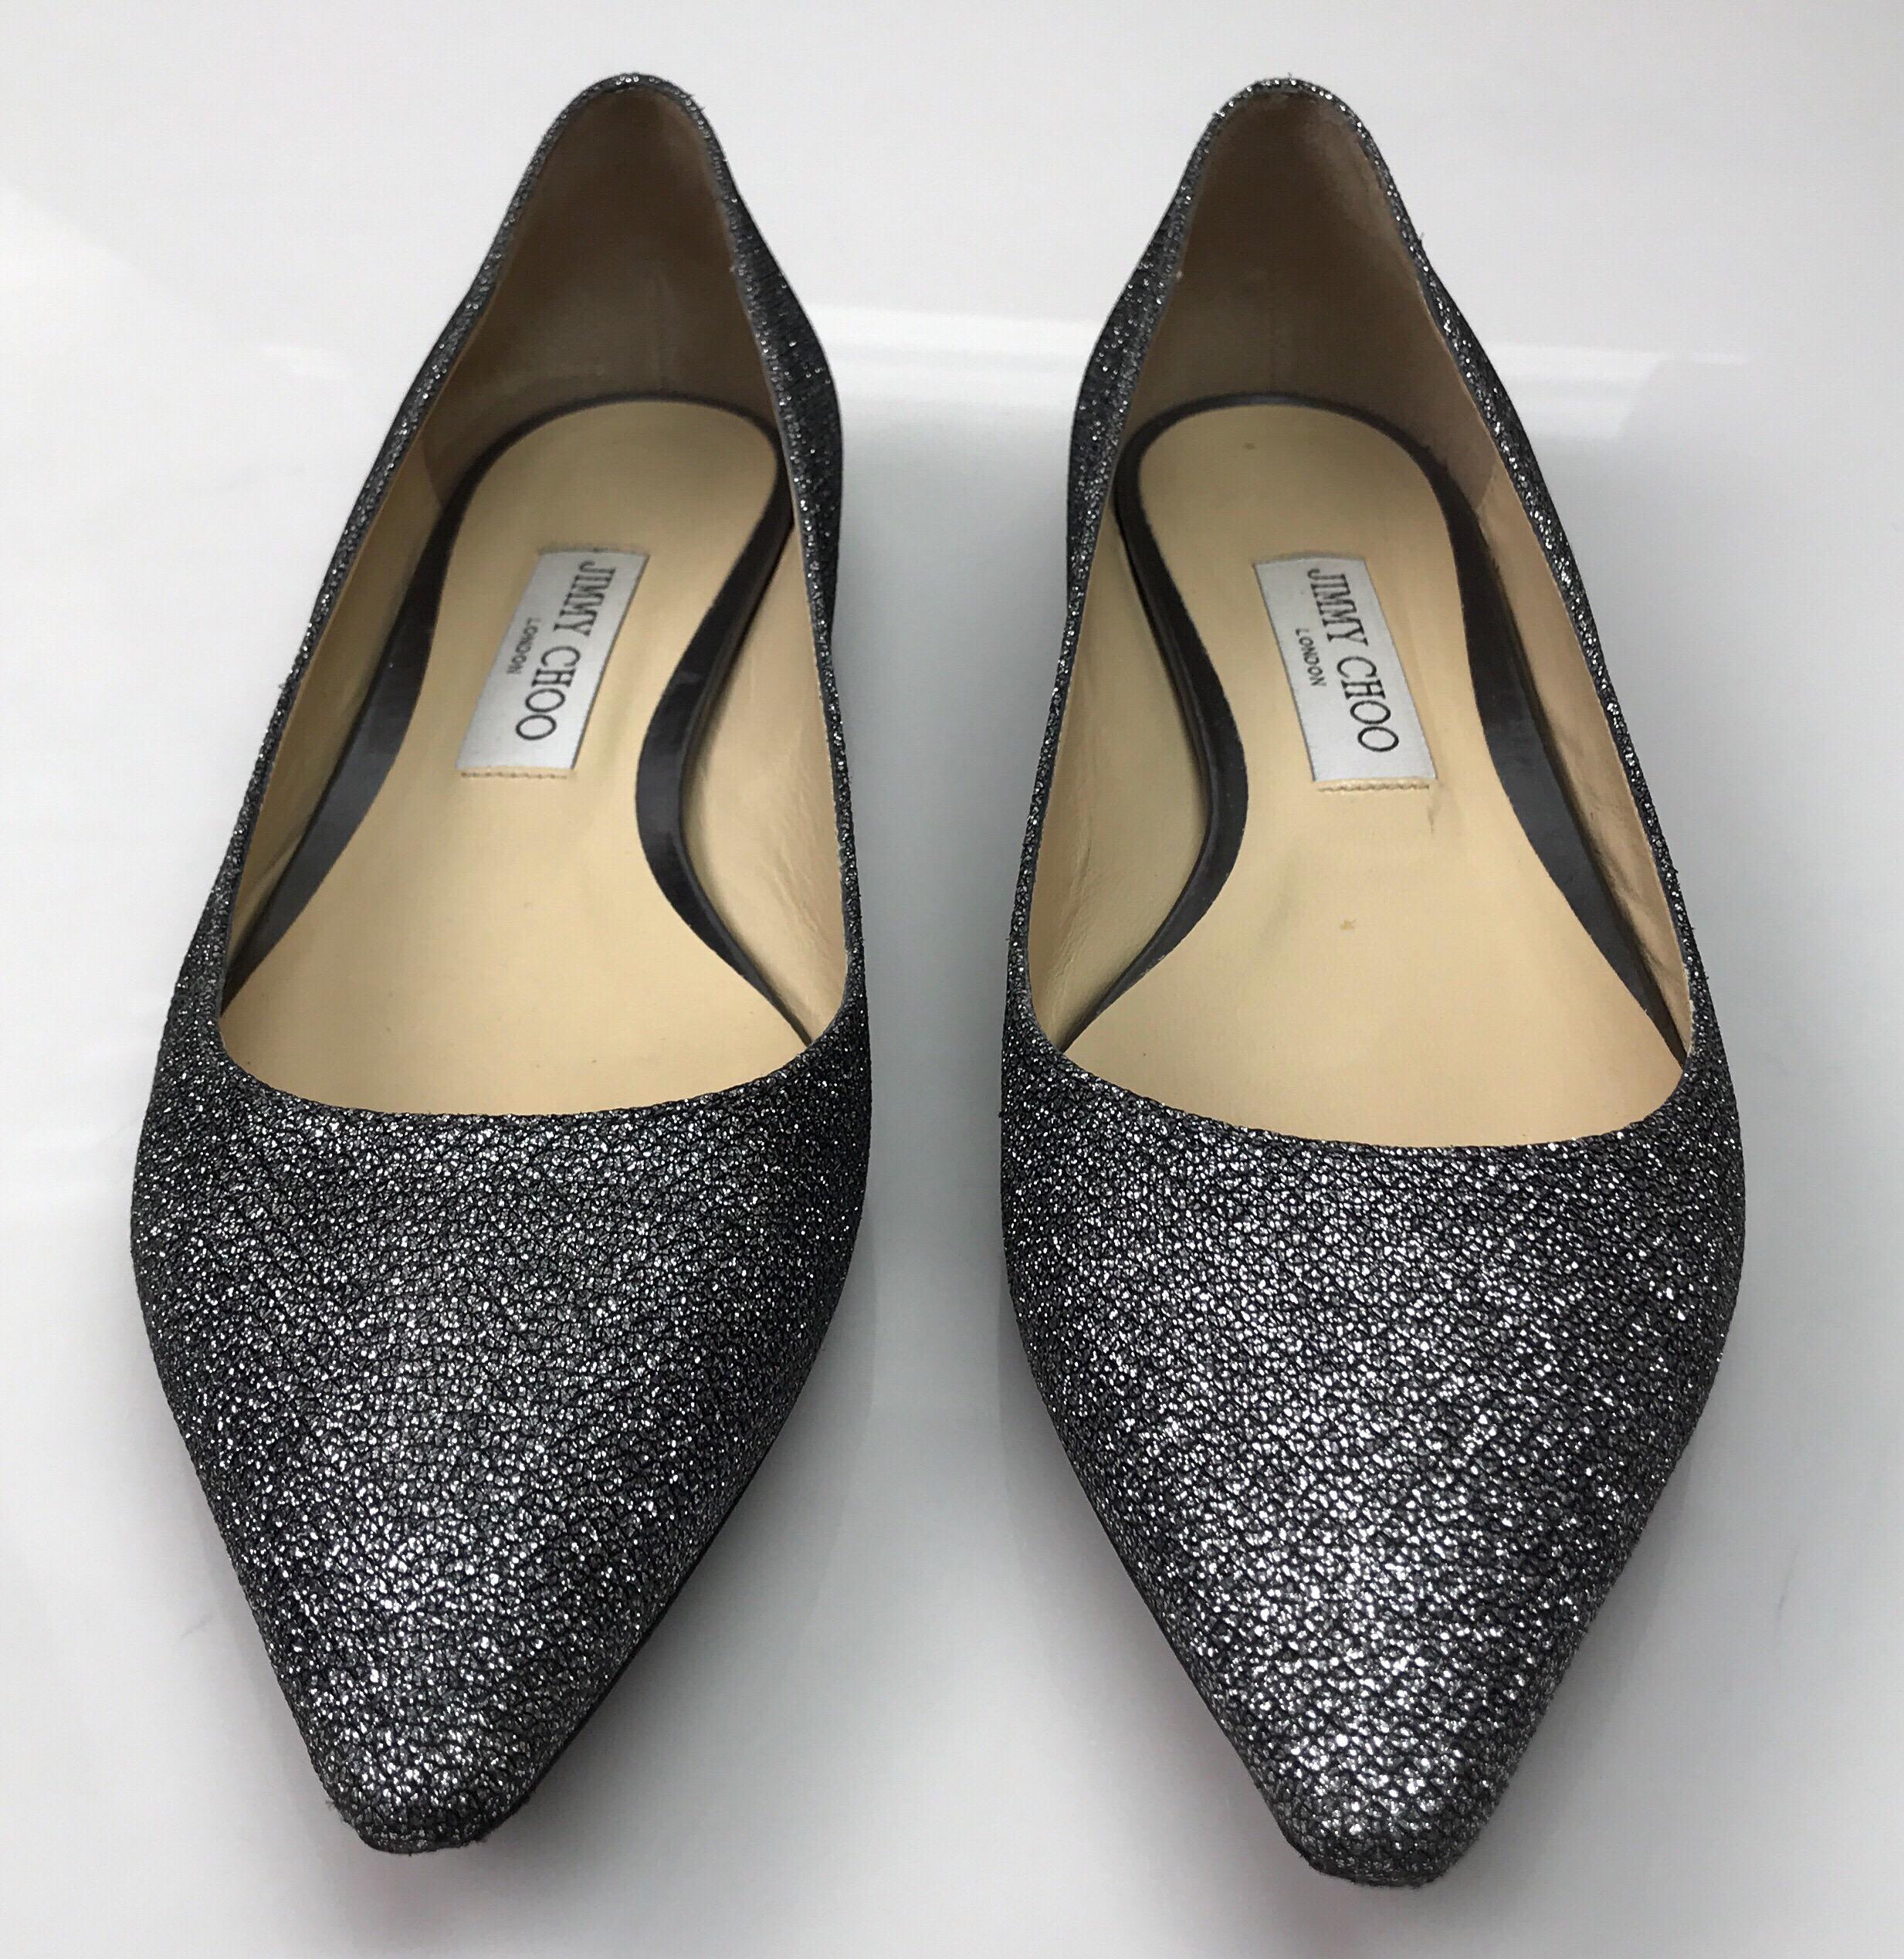 Jimmy Choo Gun metal Pointed Flats-39. These amazing Jimmy Choo pointed flats are in great condition. They show minor use on the bottom of the shoe. It has a sparkly gun metal color. The inside is a tan leather. These are the perfect evening shoe